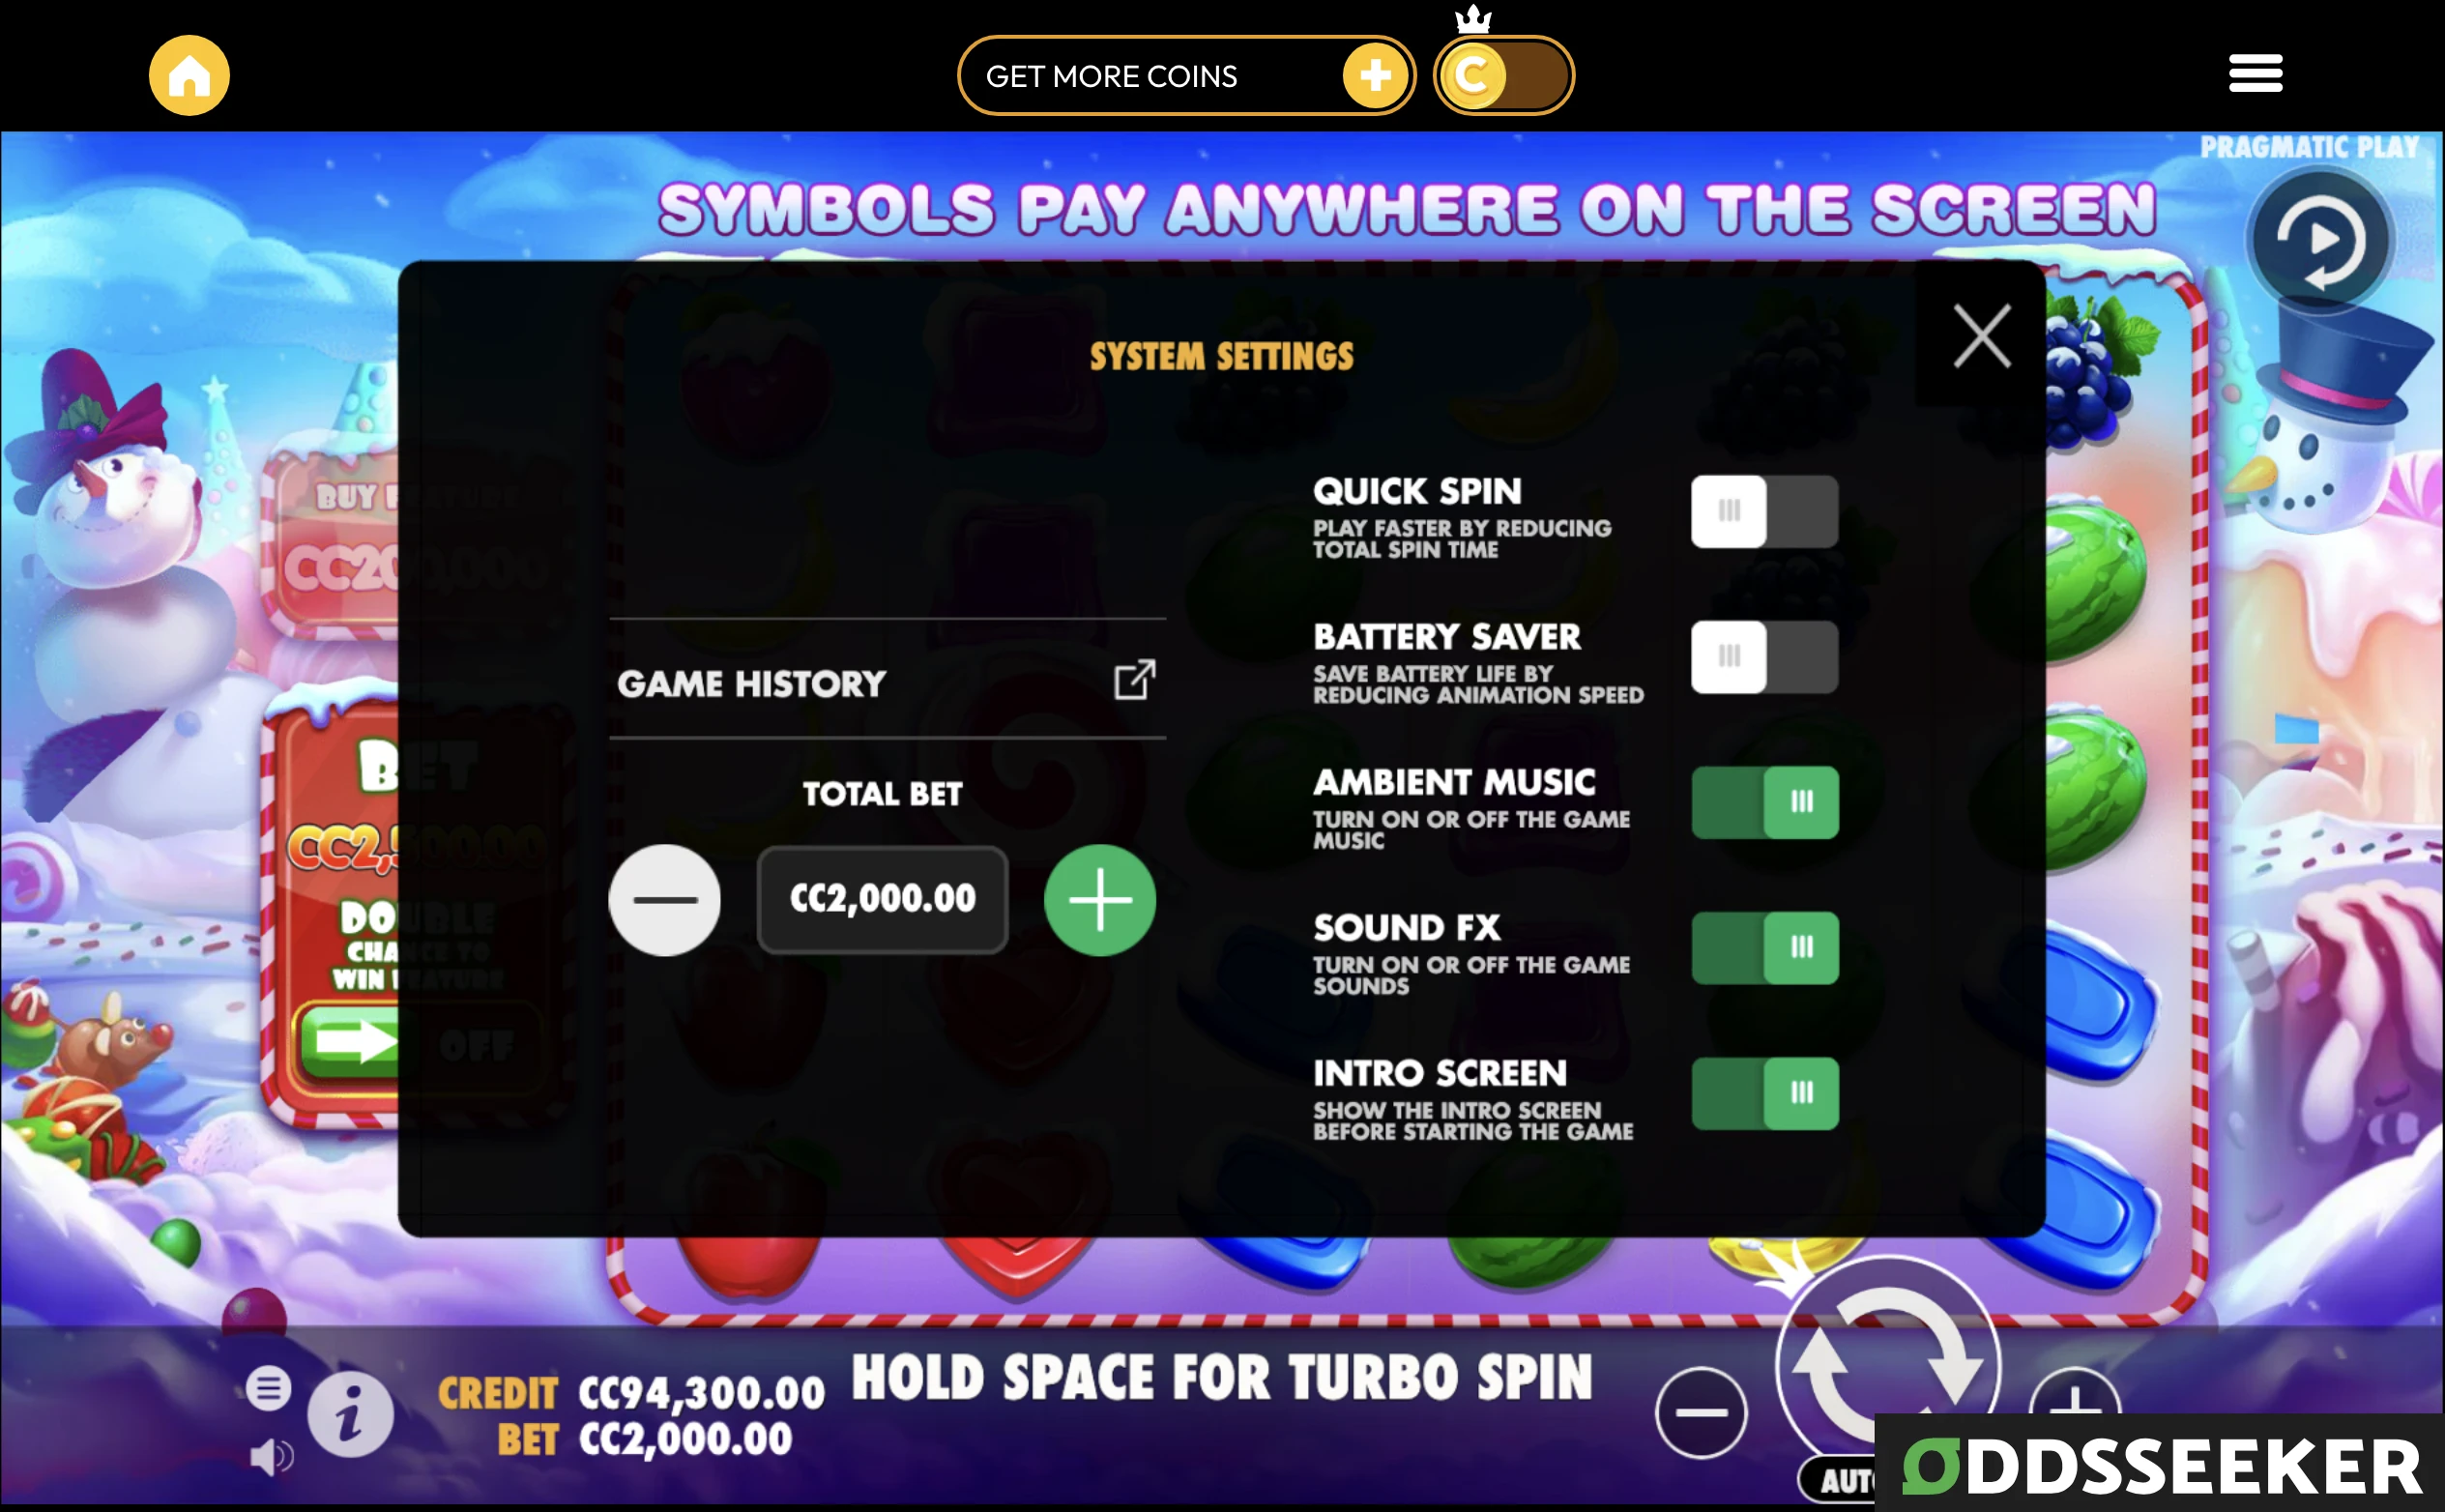 Screenshot of the game settings page in the Sweet Bonanza Xmas game, including bet amounts, sound effects, intro screen, and quick spin controls.